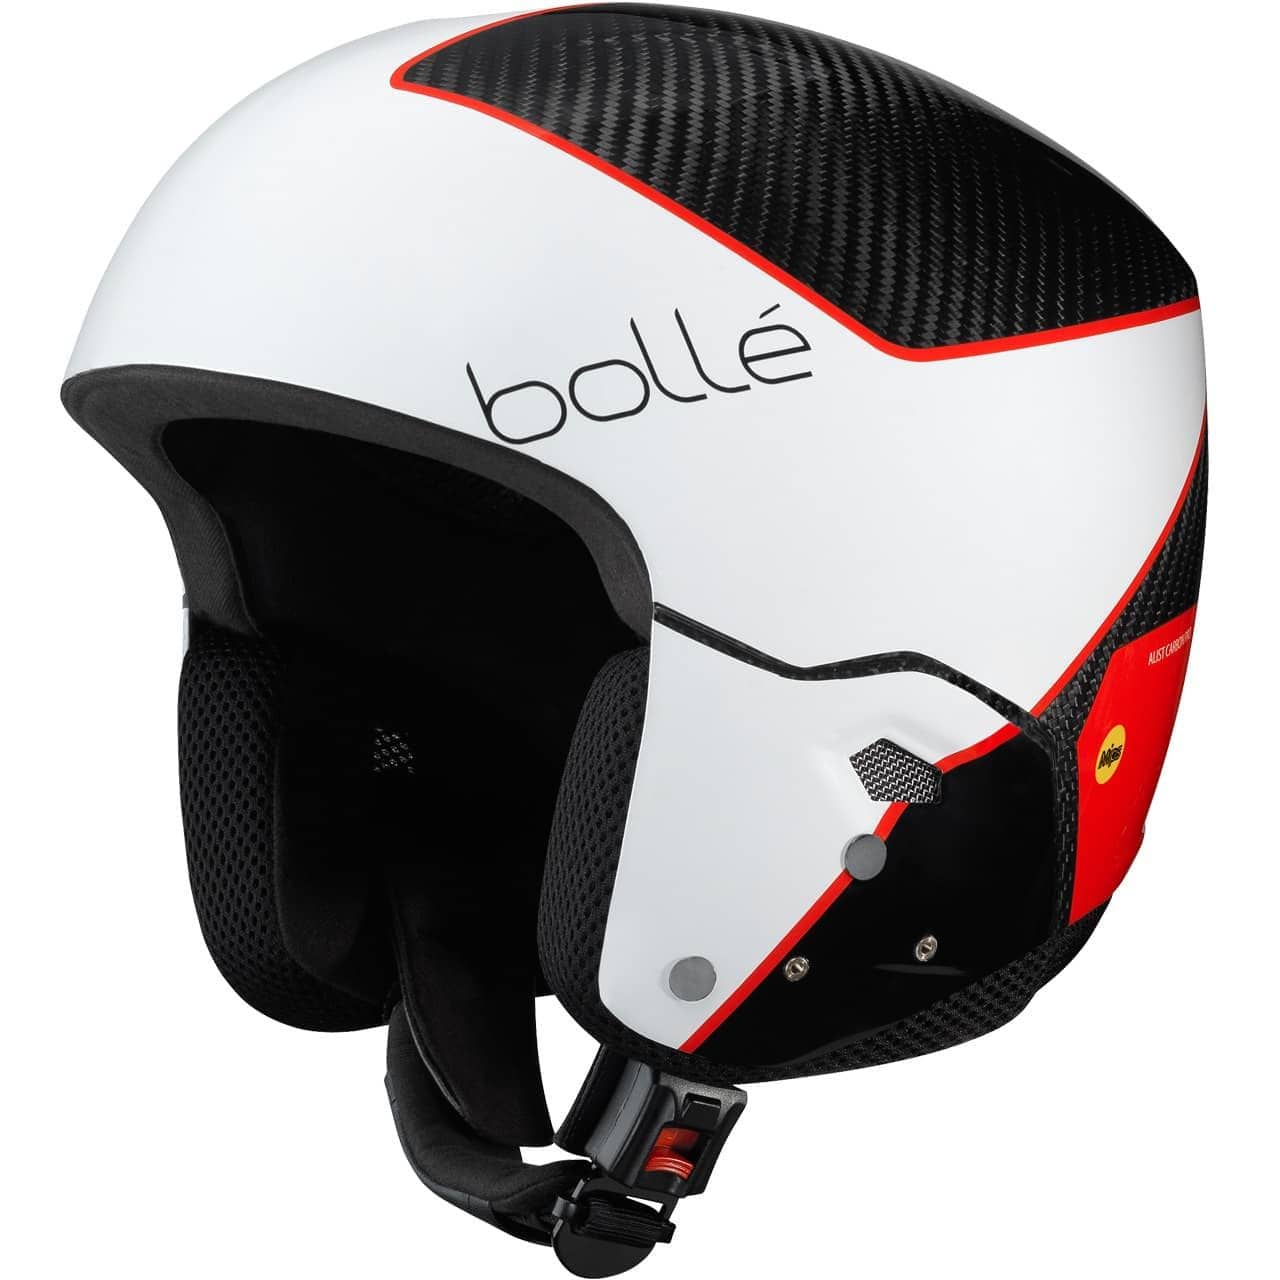 Bolle Medalist Carbon Pro Mips race white shiny von Bolle